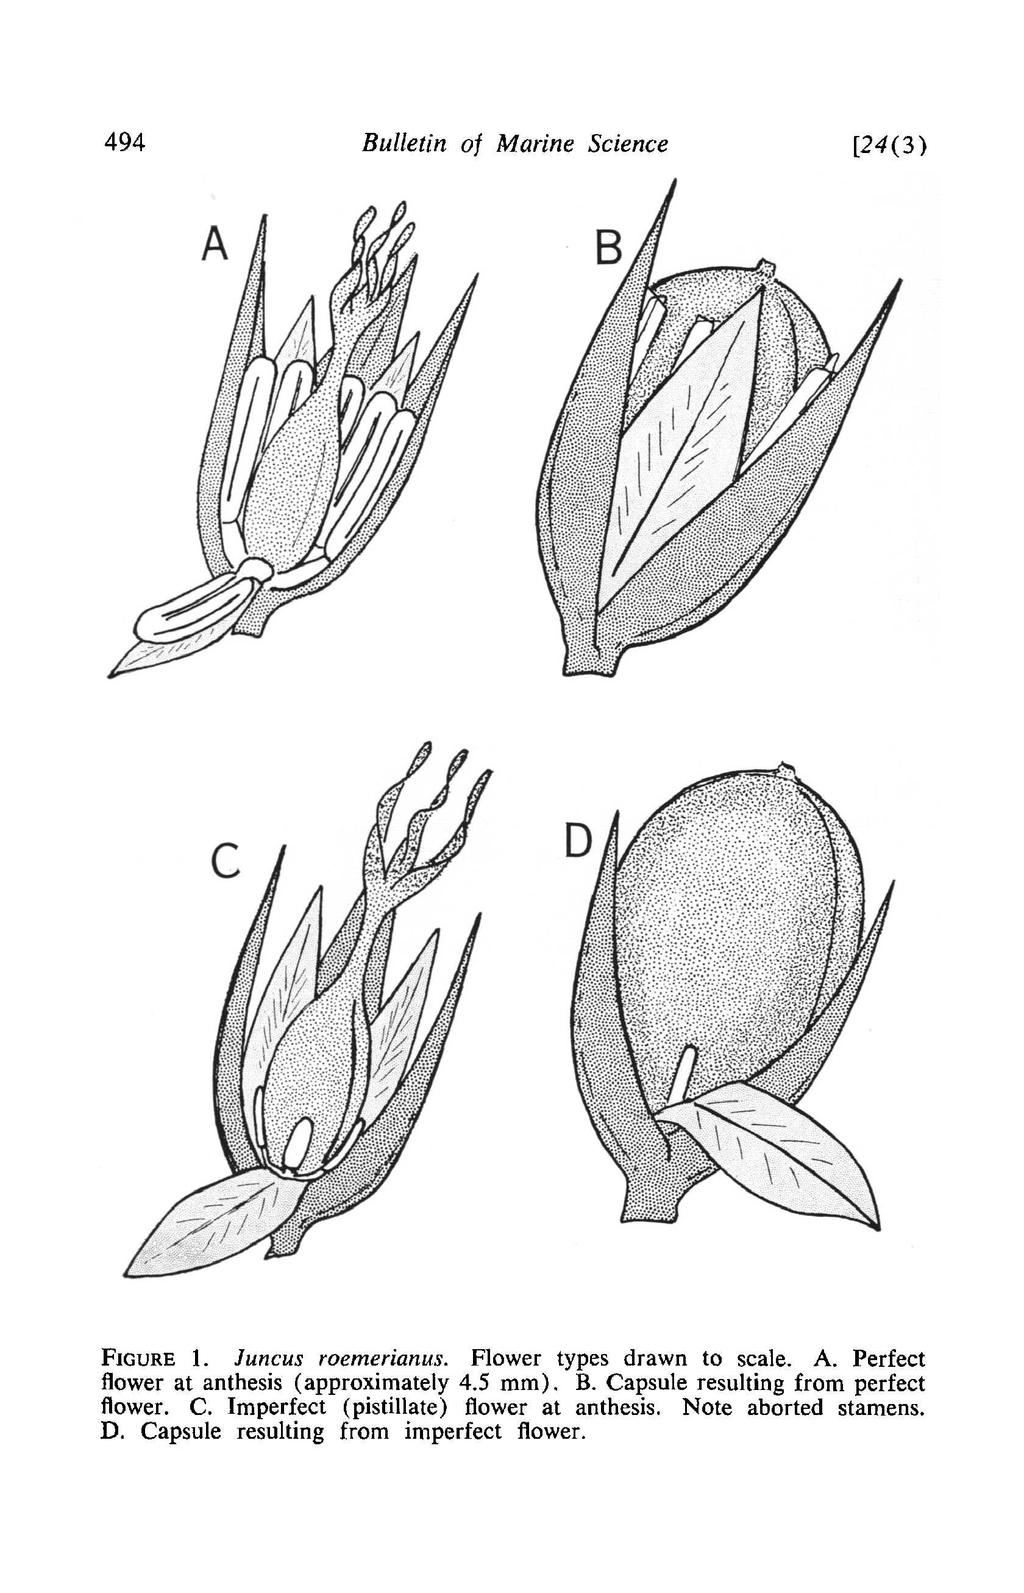 494 Bulletin of Marine Science [24(3) FIGURE 1. Juncus roemerianus. Flower types drawn to scale. A. Perfect flower at anthesis (approximately 4.5 mm).